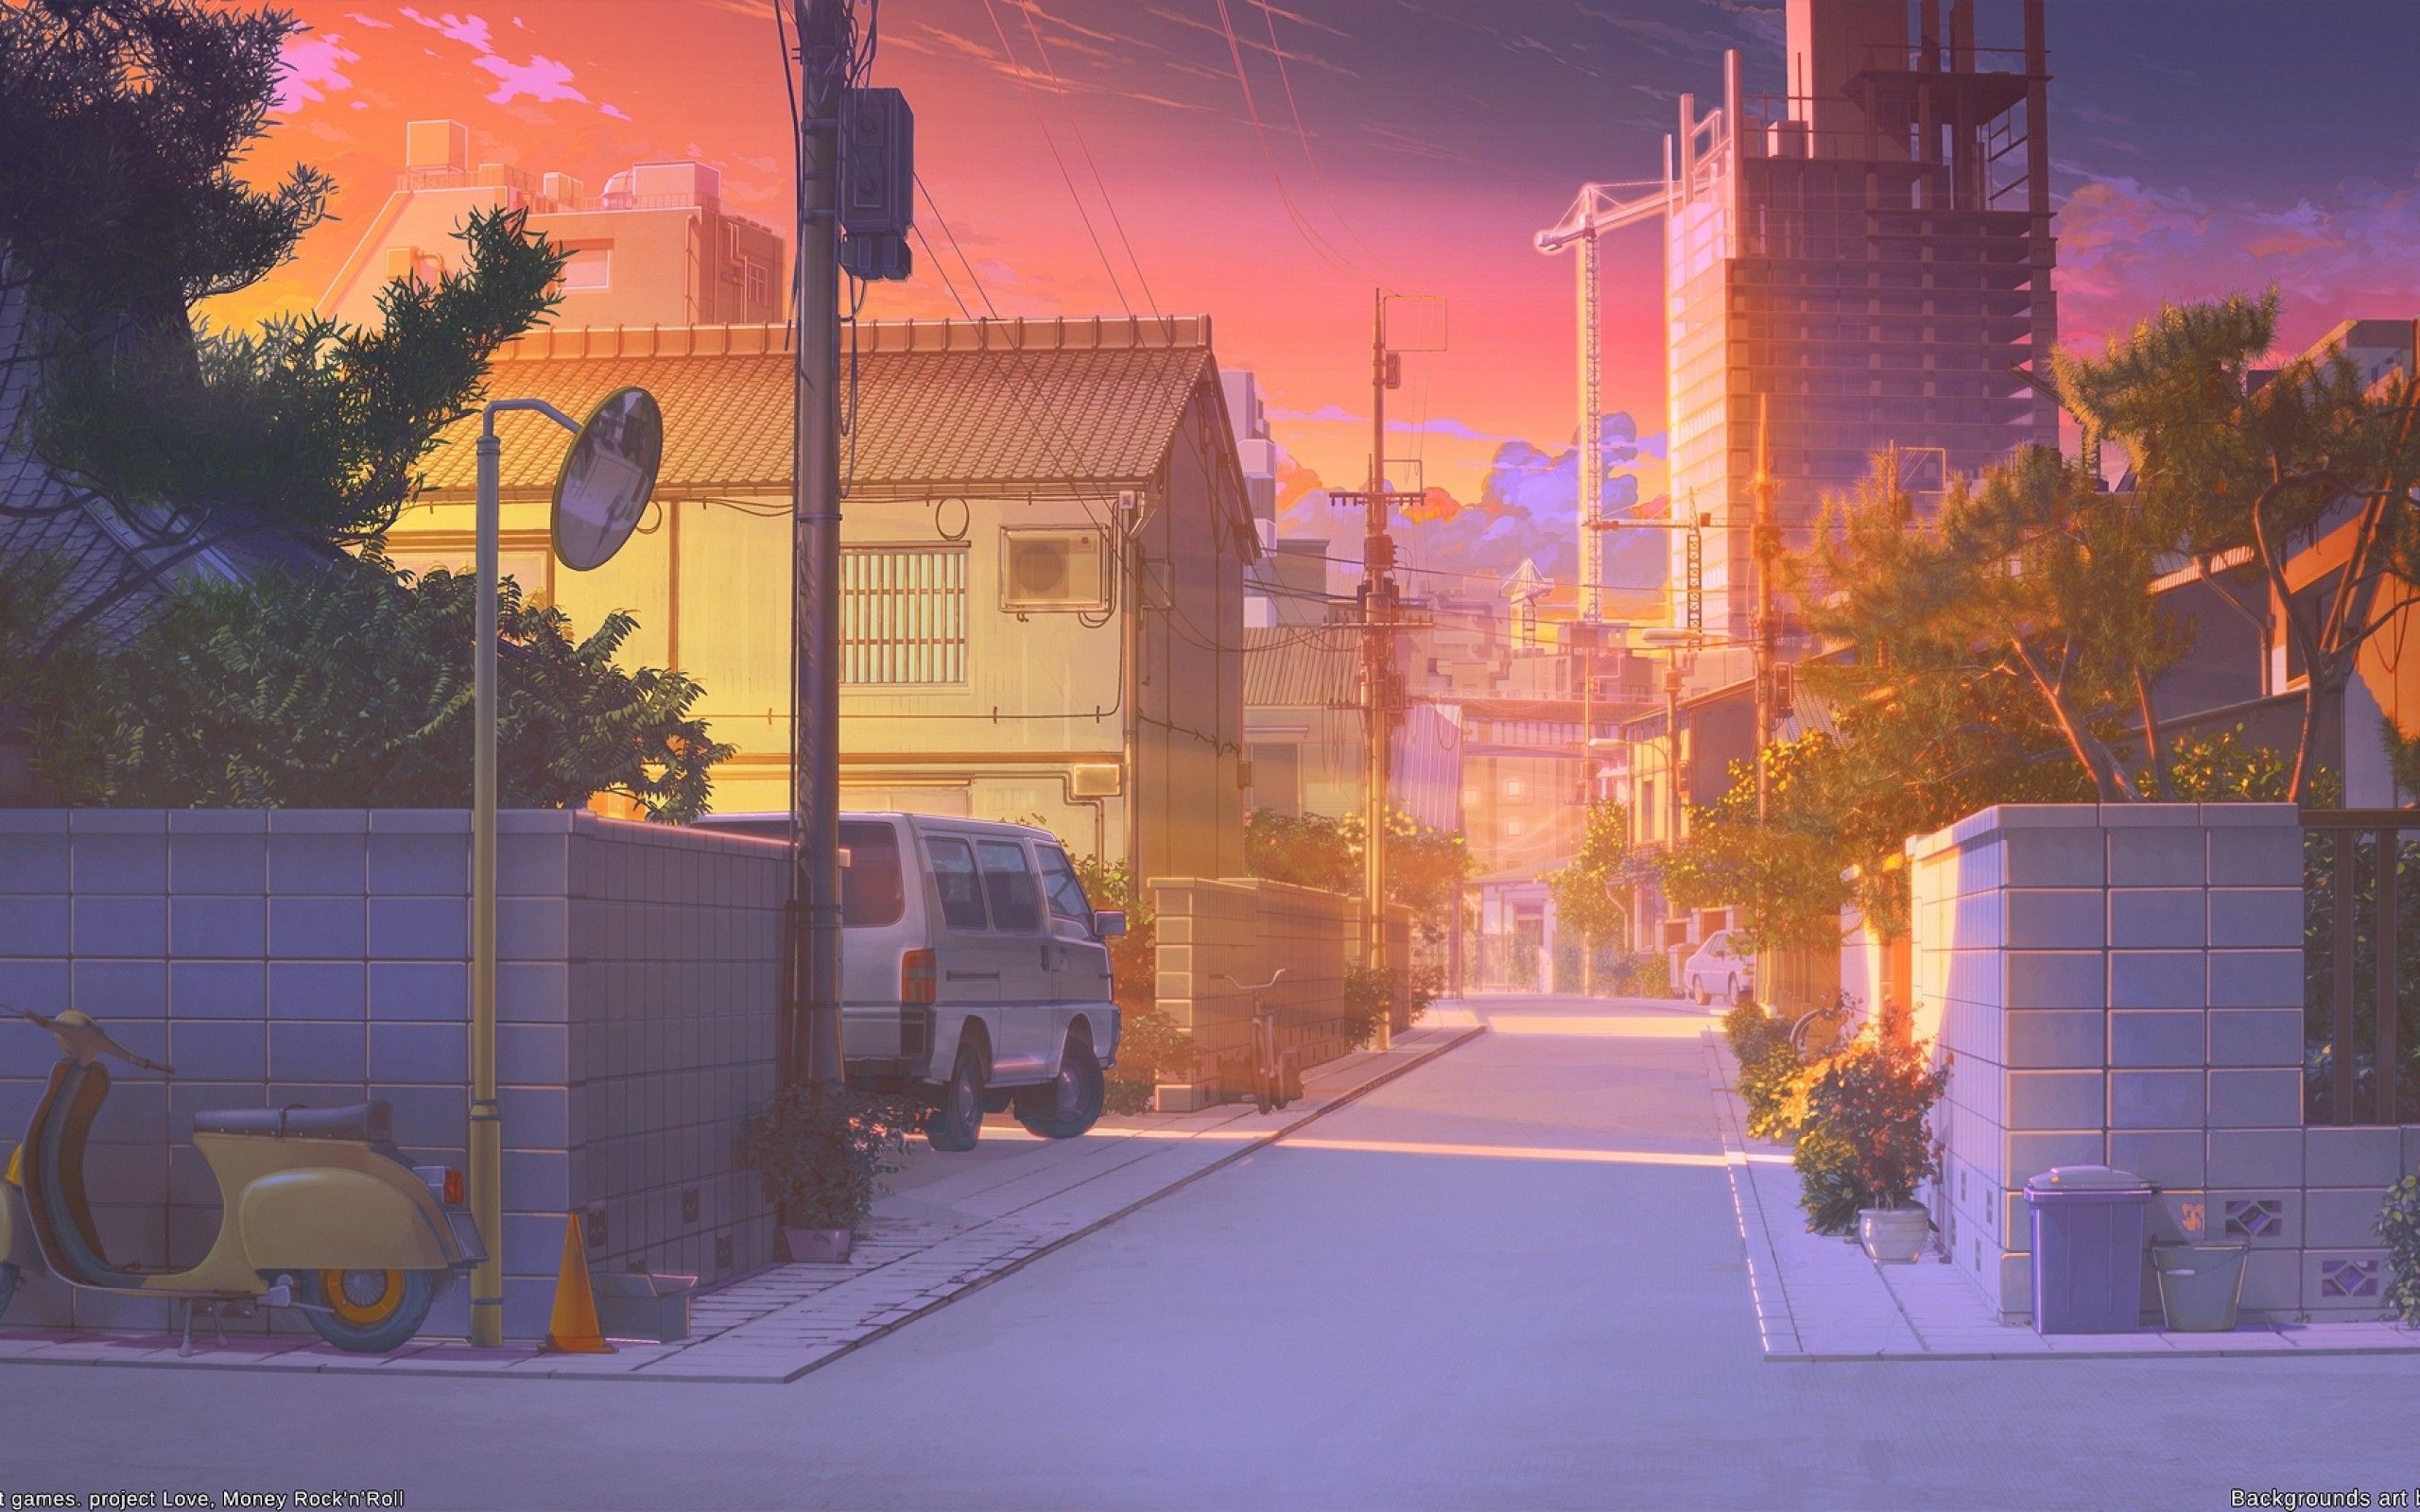 Download 2560x1600 Anime Street, Scenic, Sunset, Buildings, Car, Wall Wallpaper for MacBook Pro 13 inch. Anime background, Scenery background, Anime city